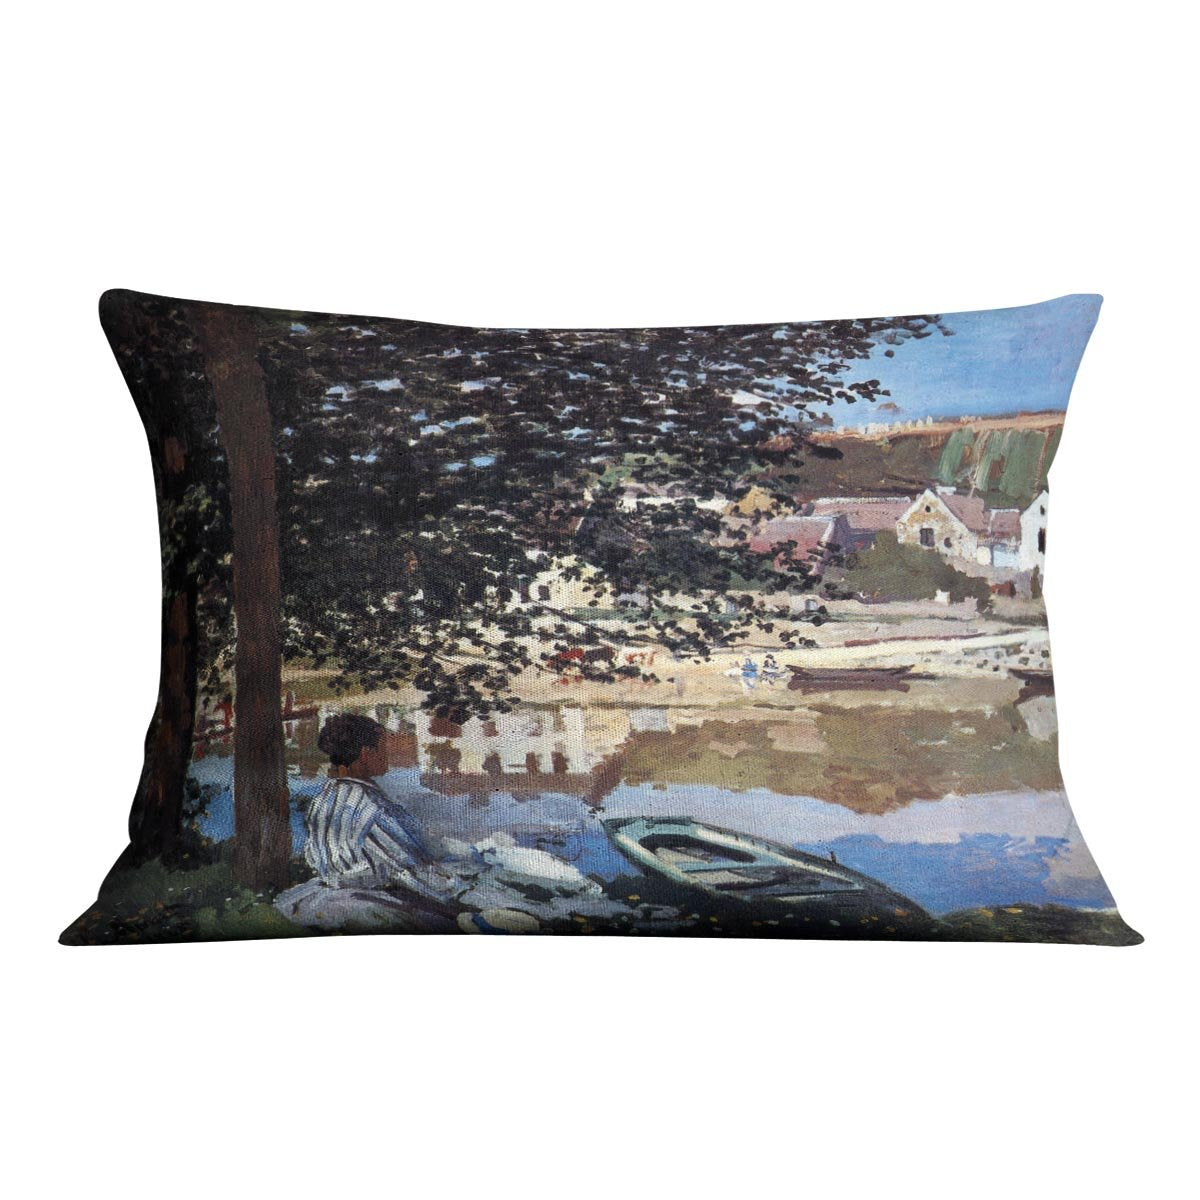 The river has burst its banks by Monet Throw Pillow